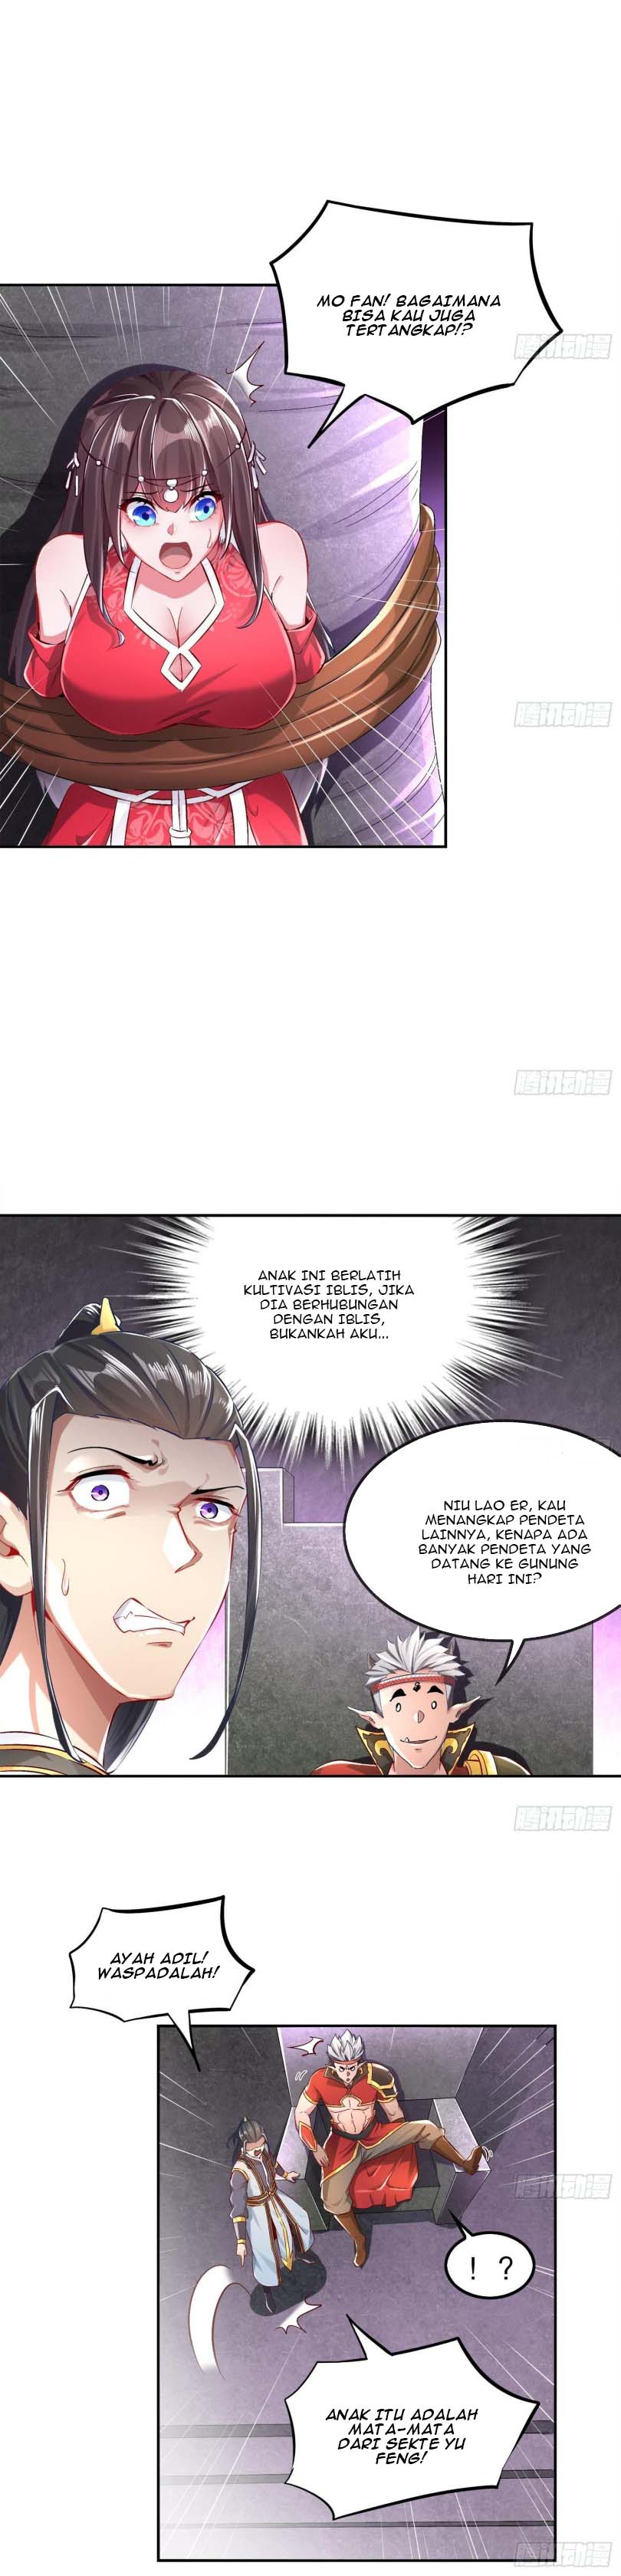 Rebirth of the Demon Reign (The Rebirth of the Demon God) Chapter 19